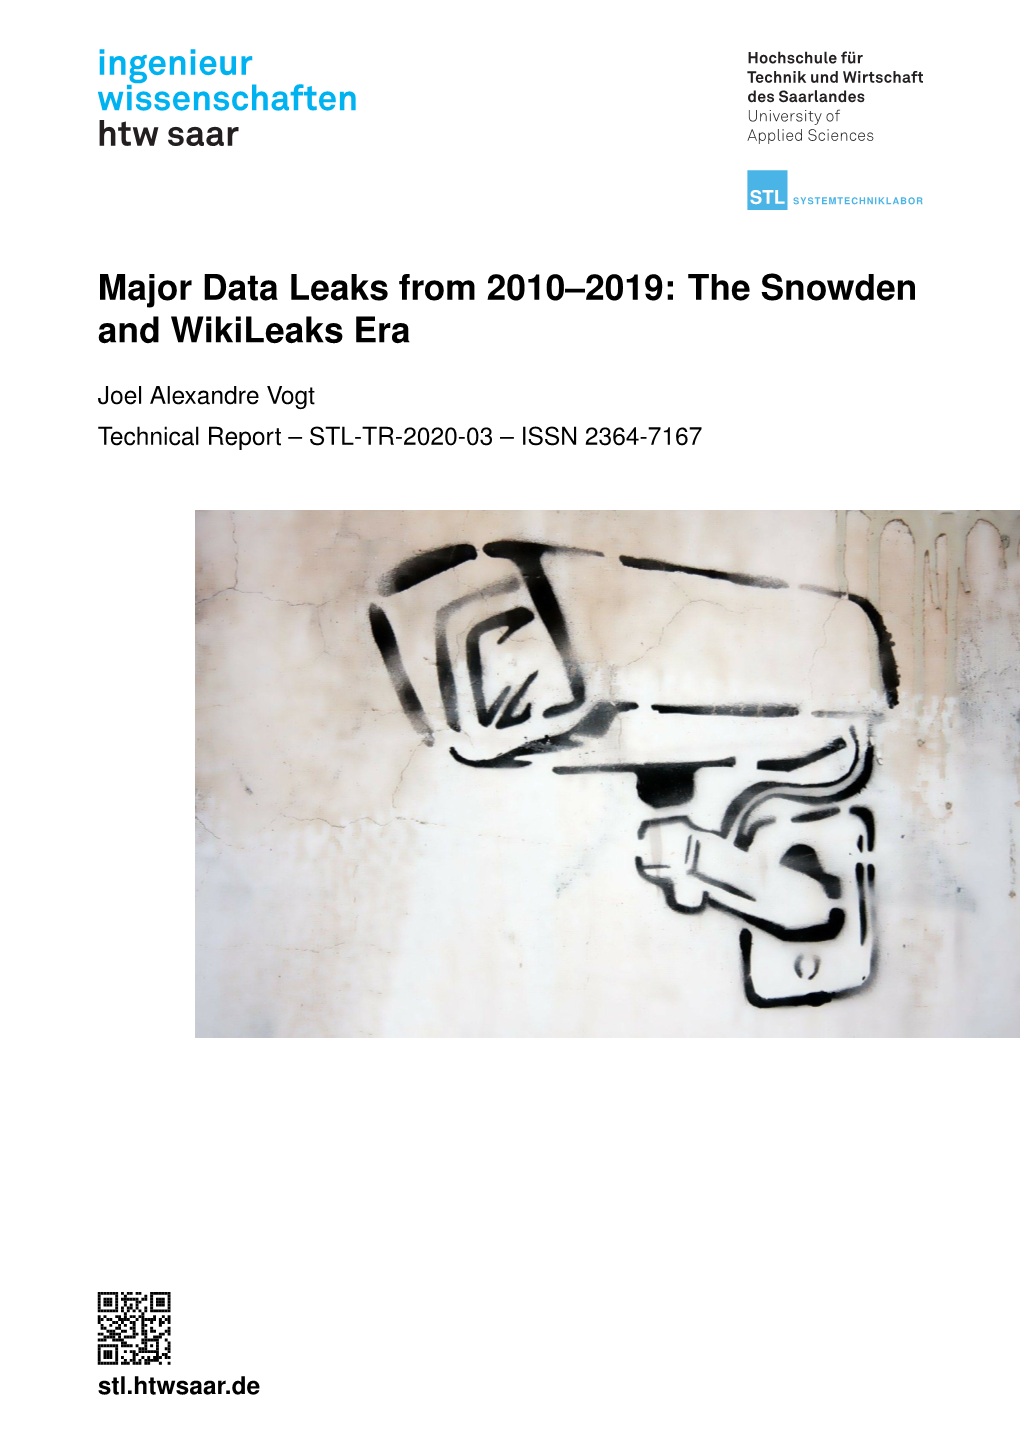 Major Data Leaks from 2010–2019: the Snowden and Wikileaks Era